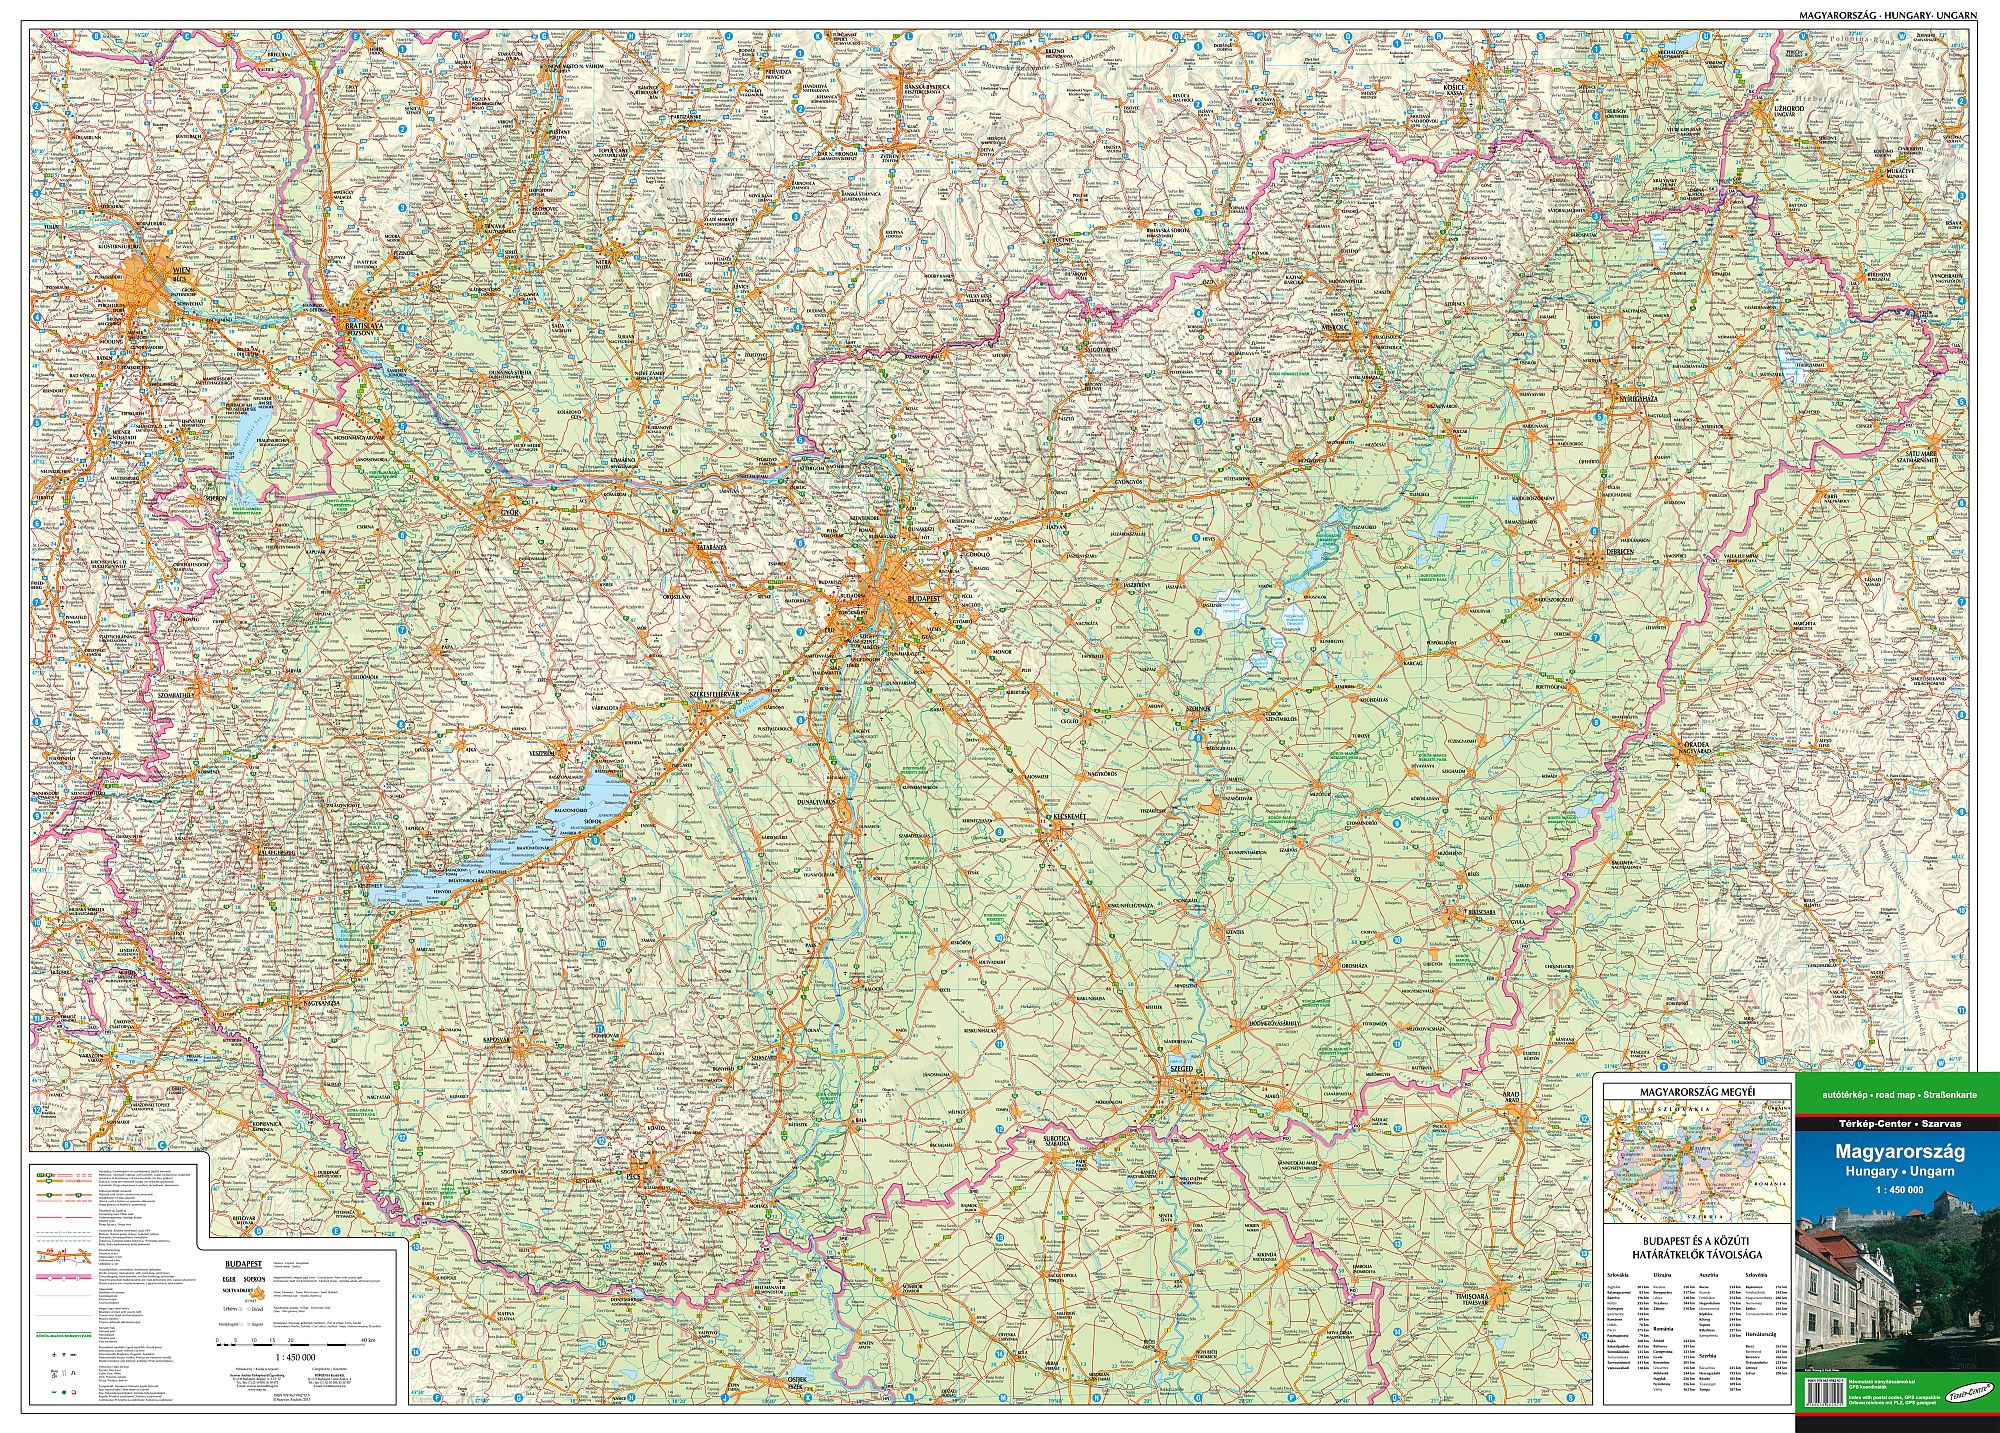 Detailed GPS compatible road map of Hungary for mobile devices